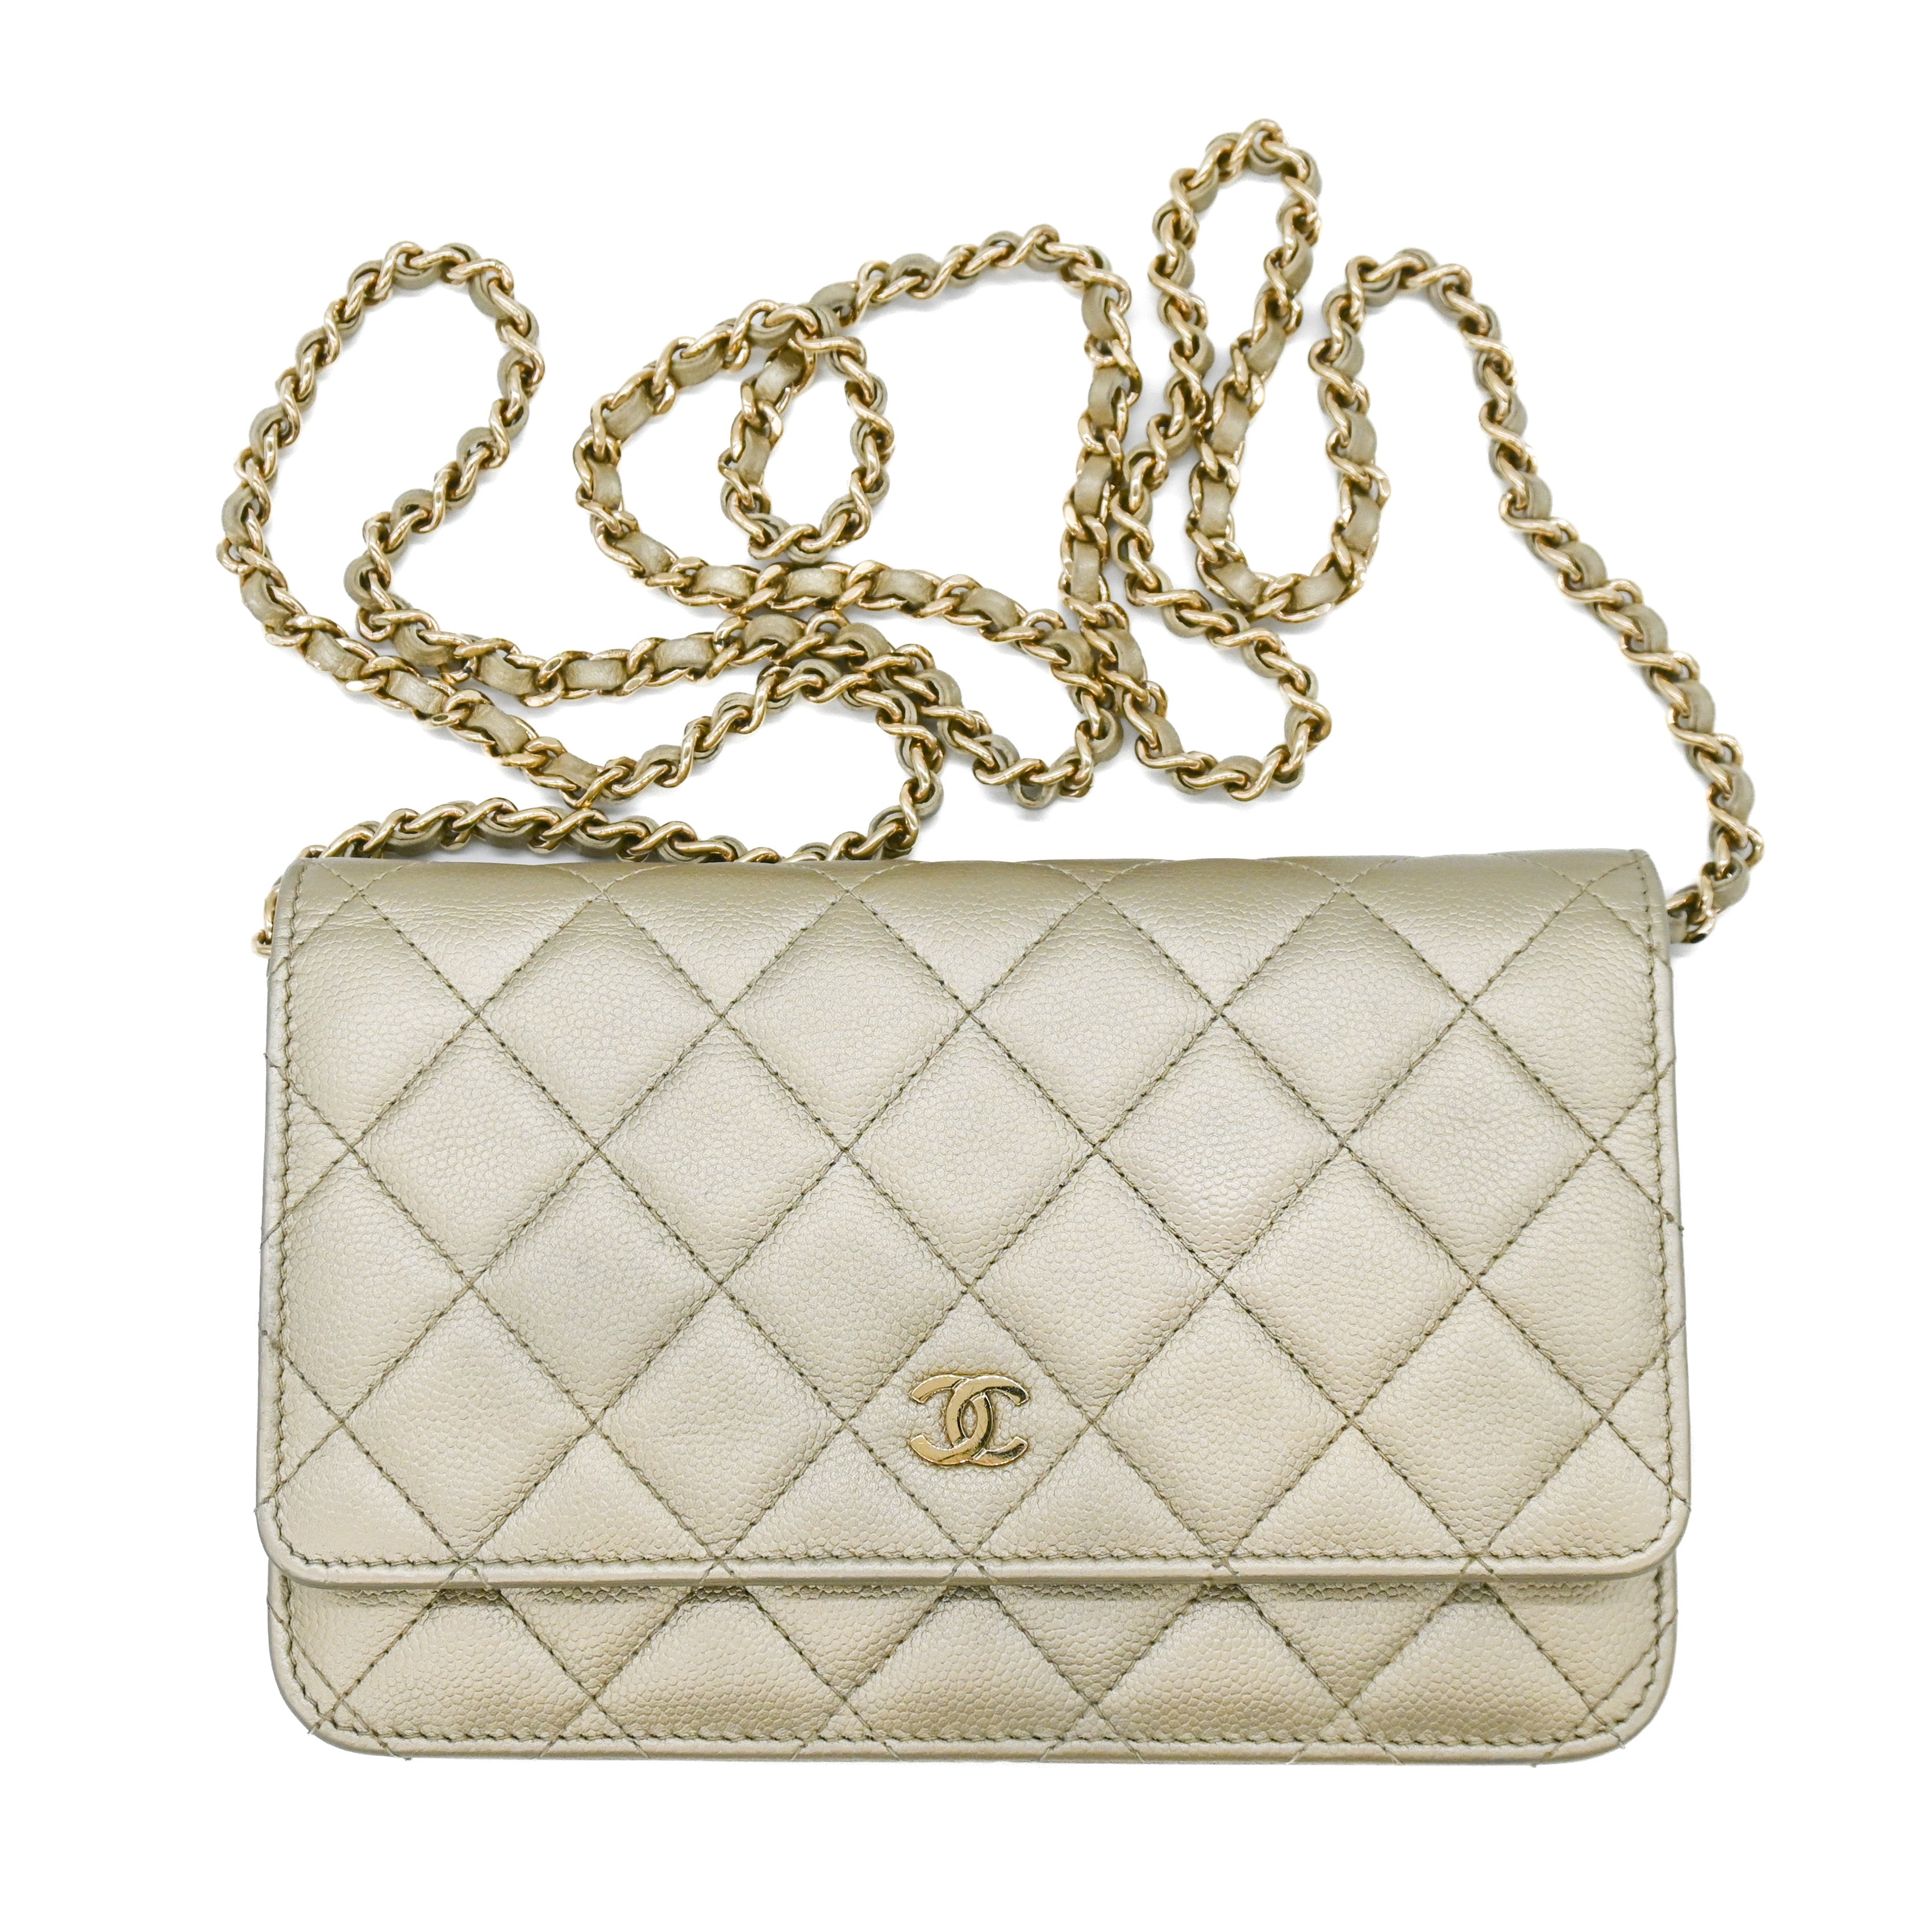 CHANEL Chanel Wallet on Chain Light Gold Caviar Leather with Gold Hardware - Vault 55